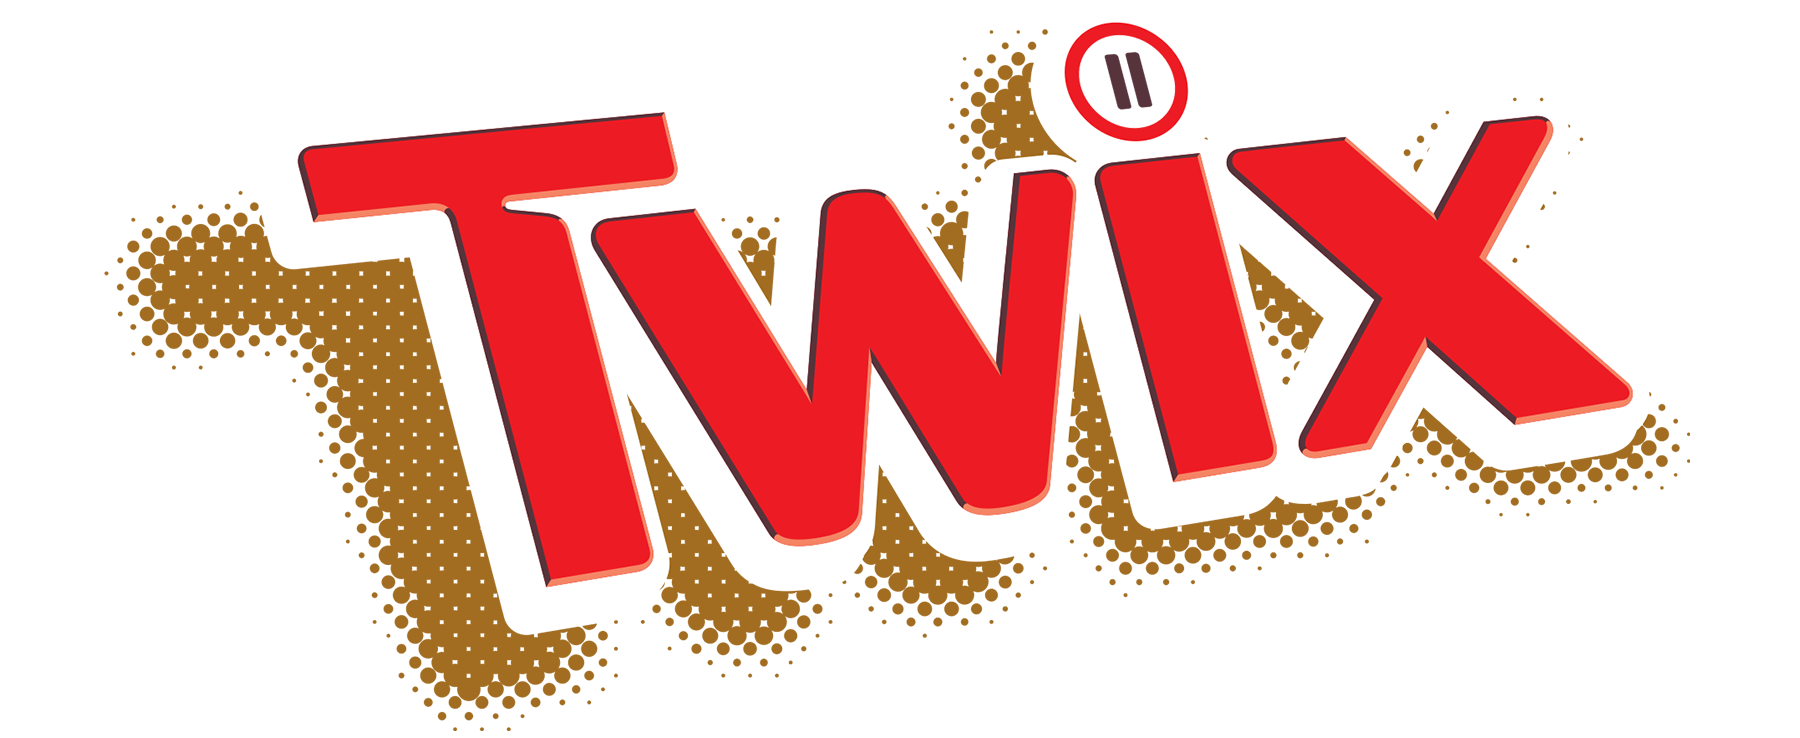 Bar Text Twix Brand Chocolate Free Clipart HQ PNG Image